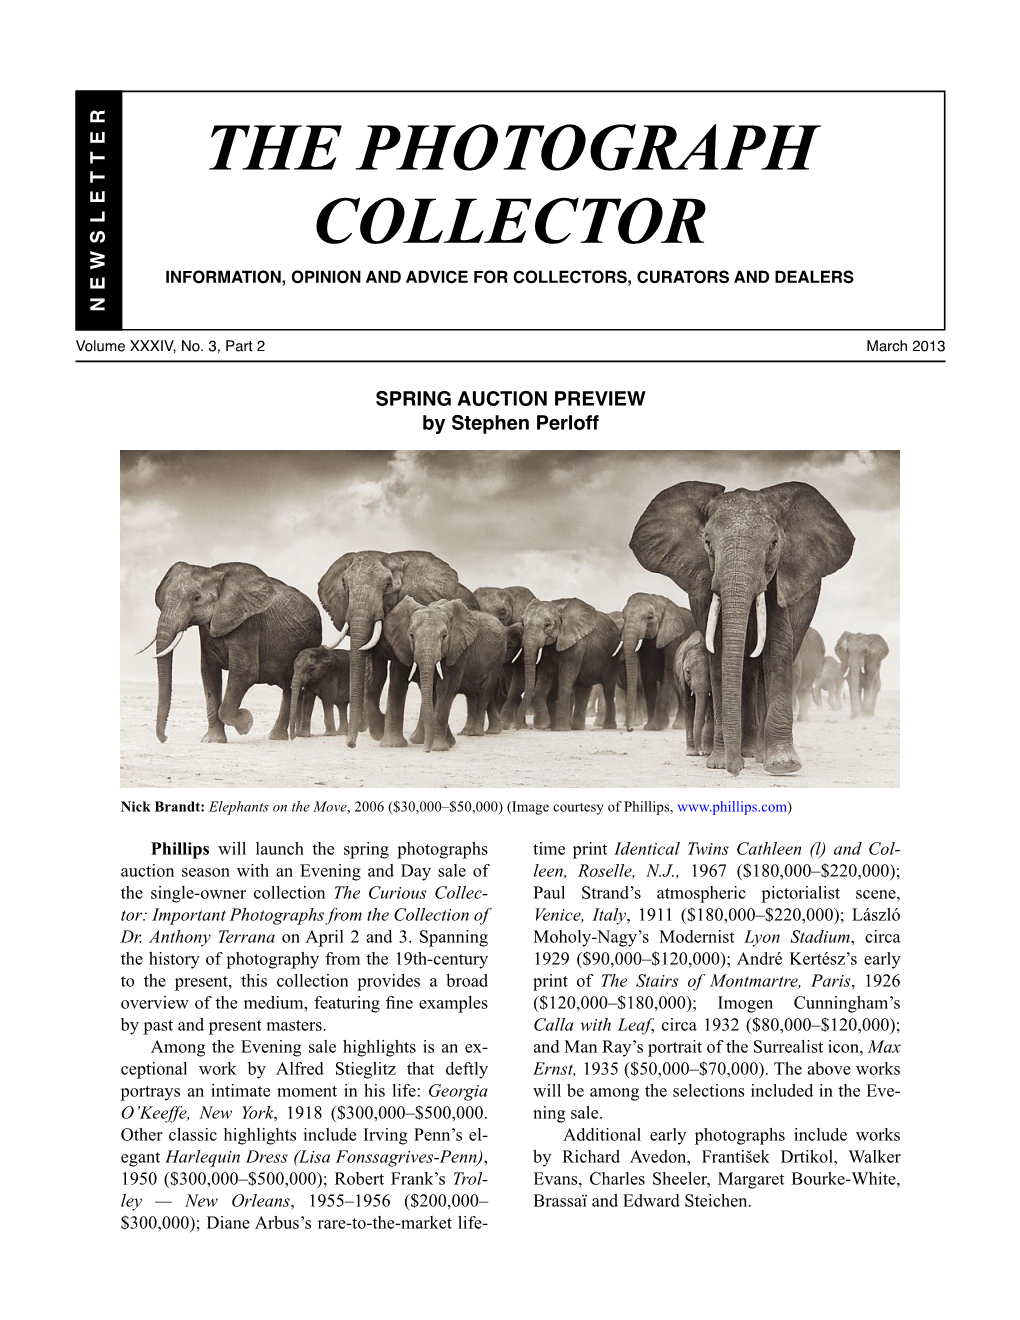 Full Issue the PHOTOGRAPH COLLECTOR